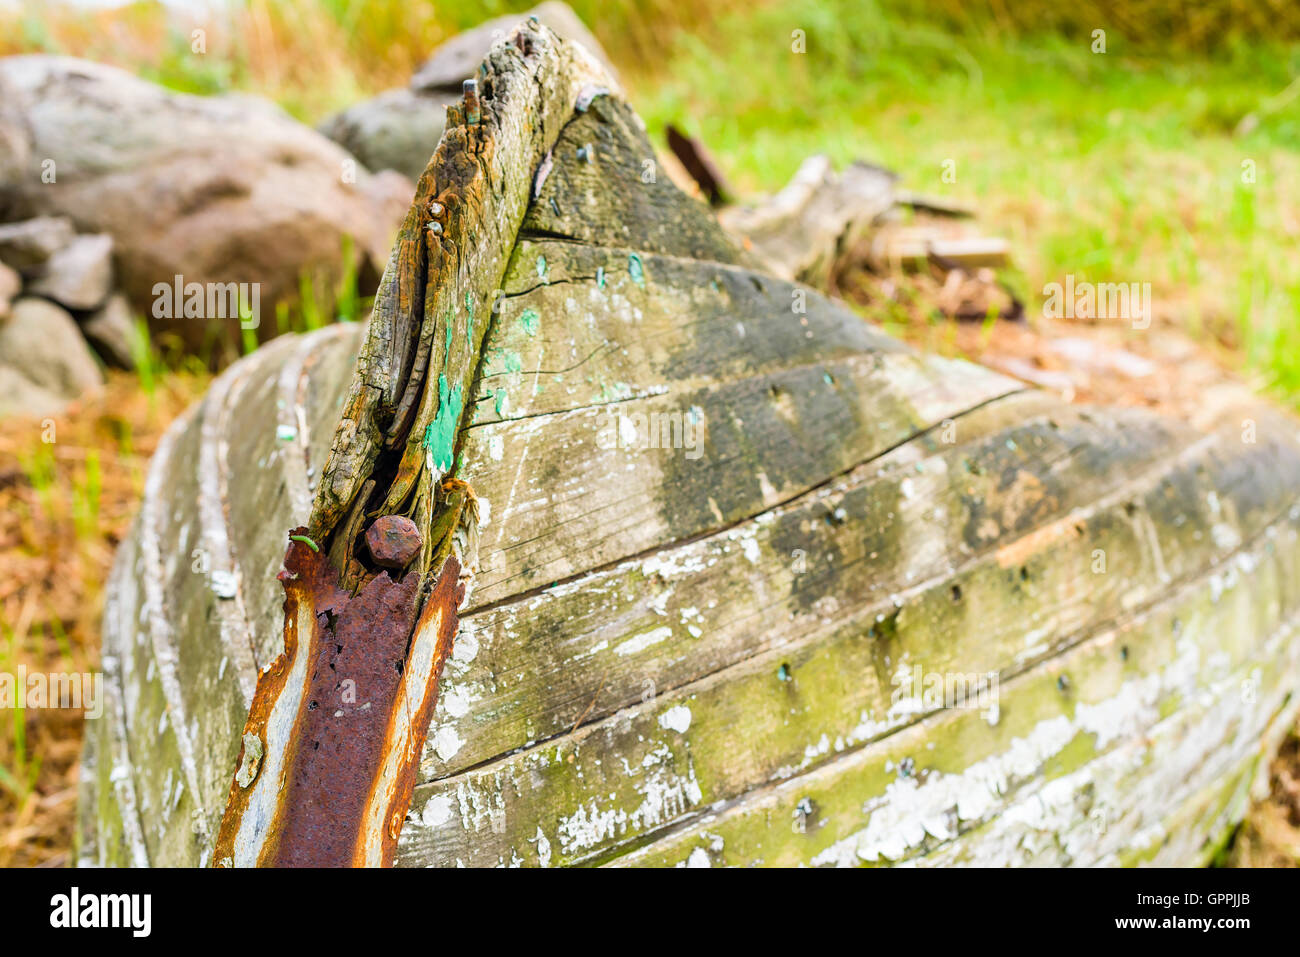 Very old rotting boat lying on dry land wasting away. Nature is slowly reclaiming the material in the abandoned vessel. Stock Photo